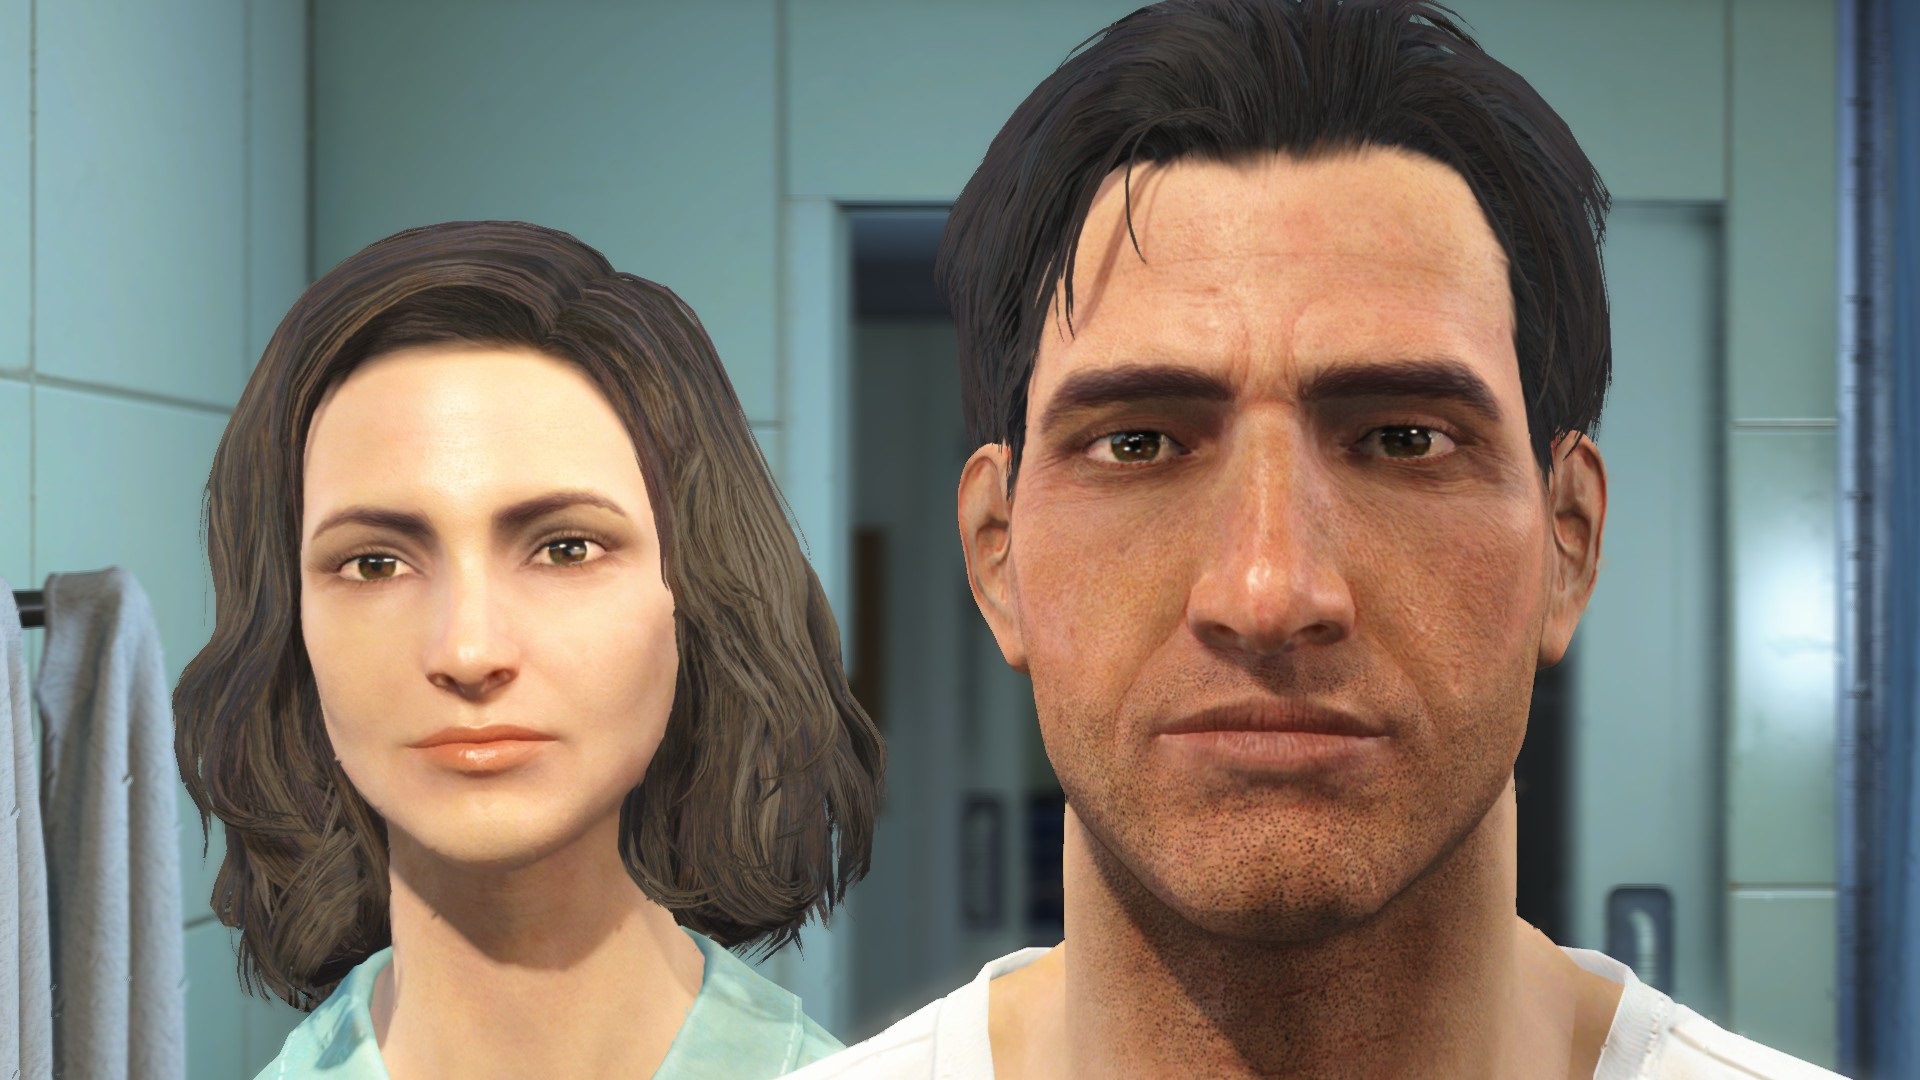 Update: Fallout 4’s lead writer reverses gear, says main character is not actually a war criminal